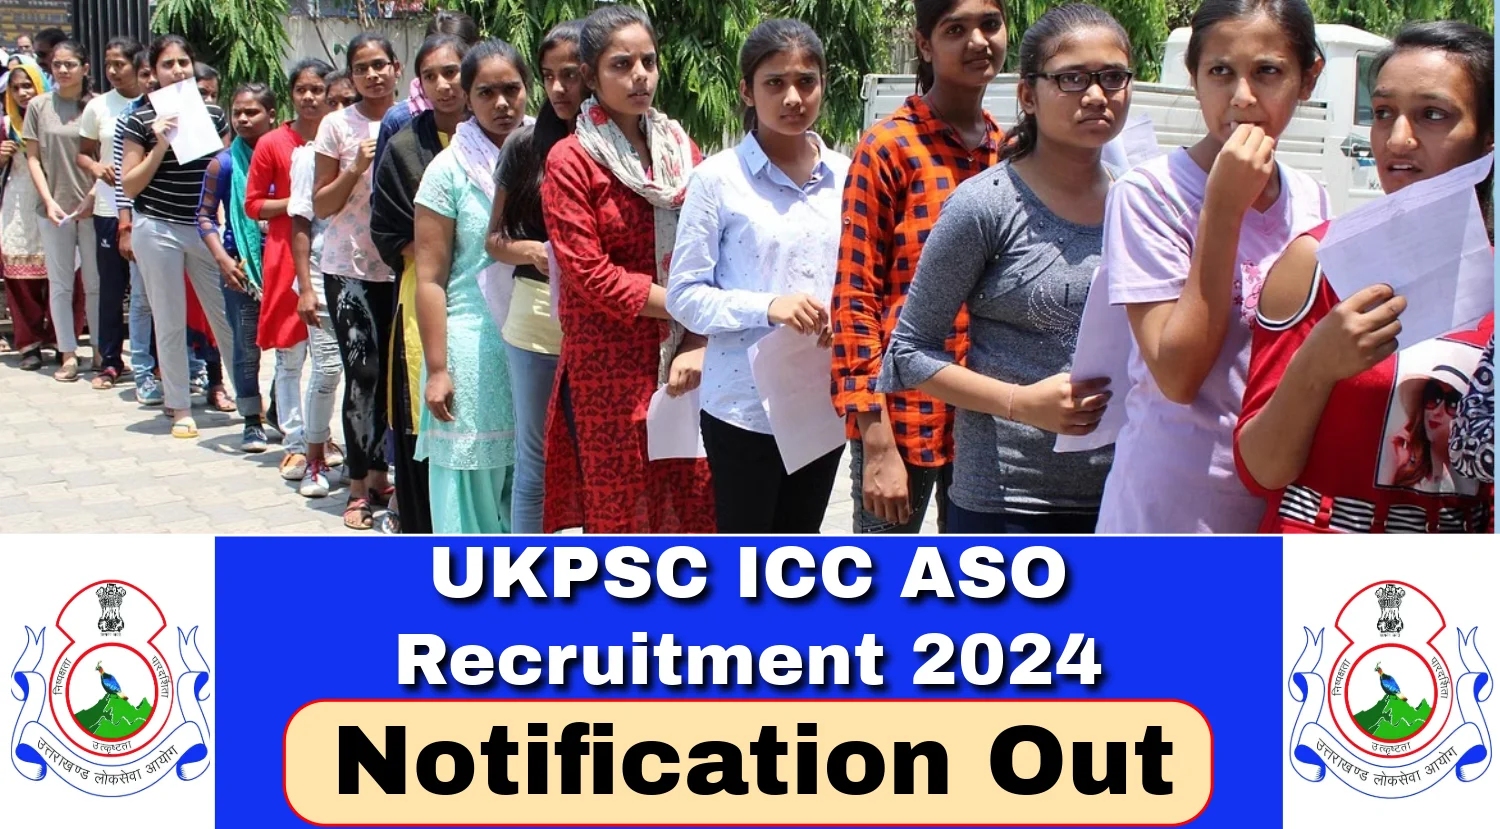 UKPSC ICC ASO Recruitment 2024 Notification Out for 223 Posts